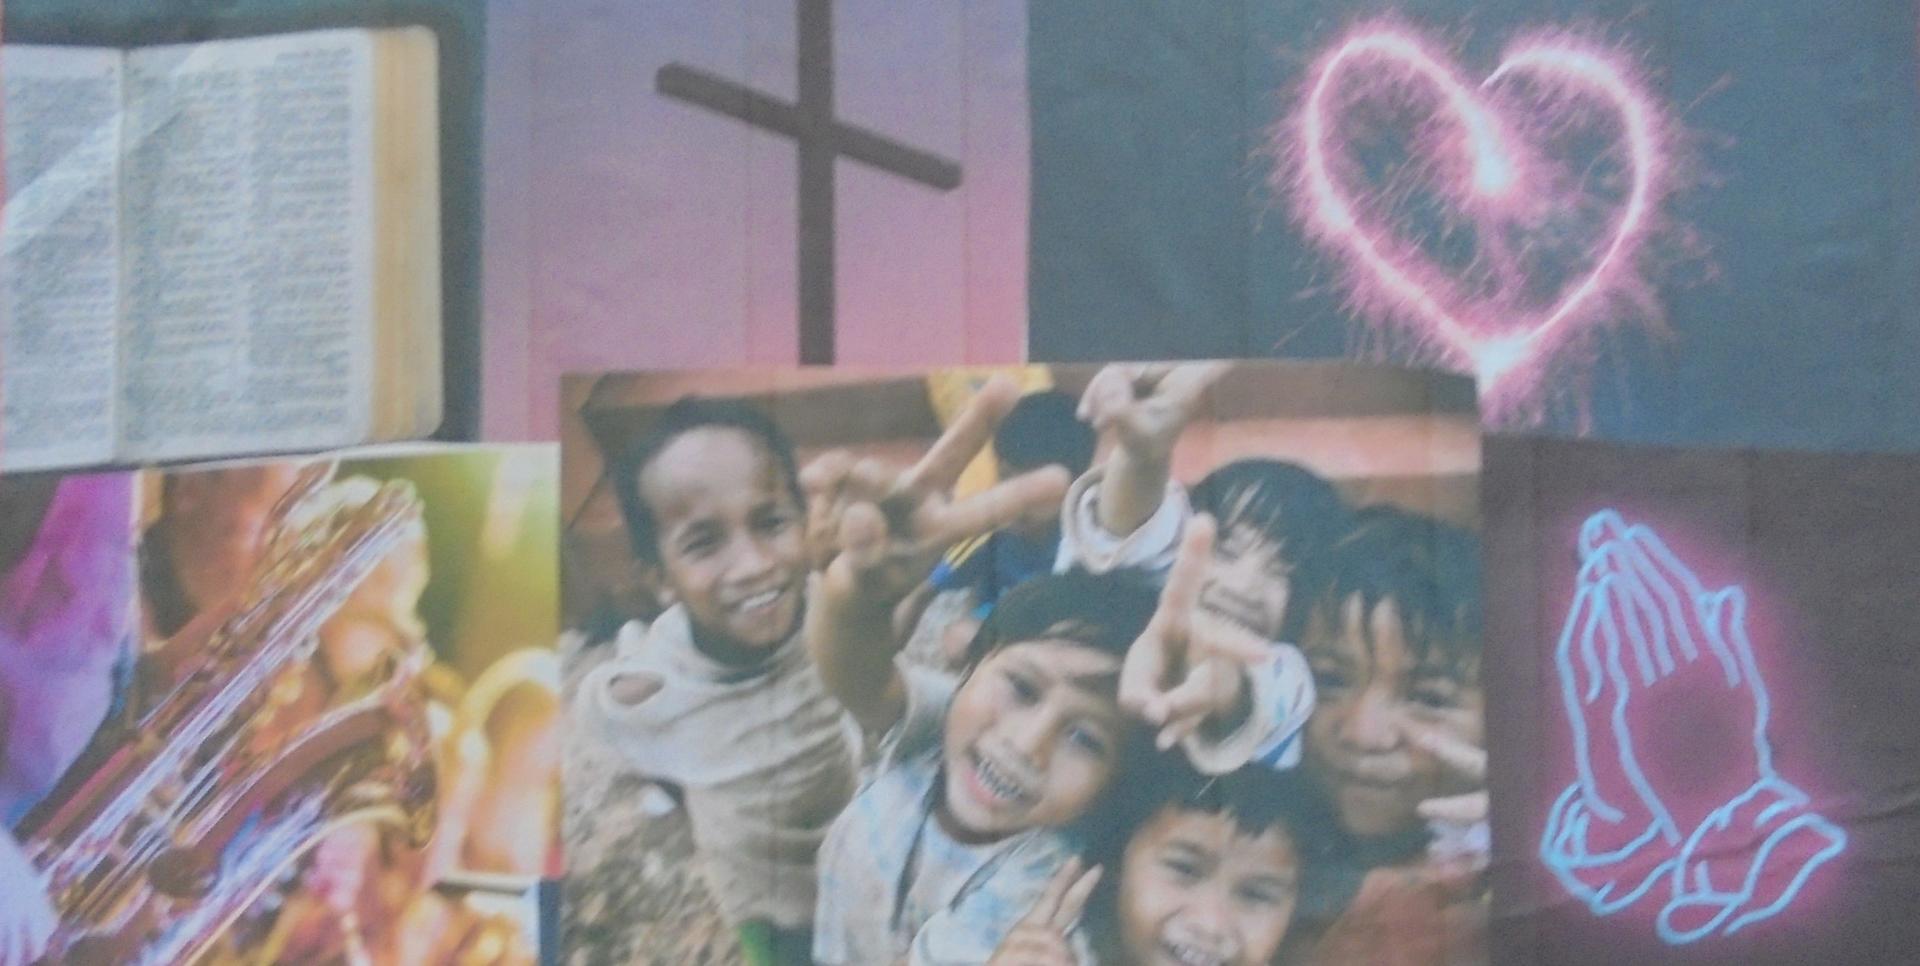 Collage of images - a bible, a cross, a love heart, someone playing the saxophone, happy children, hands lifted in prayer